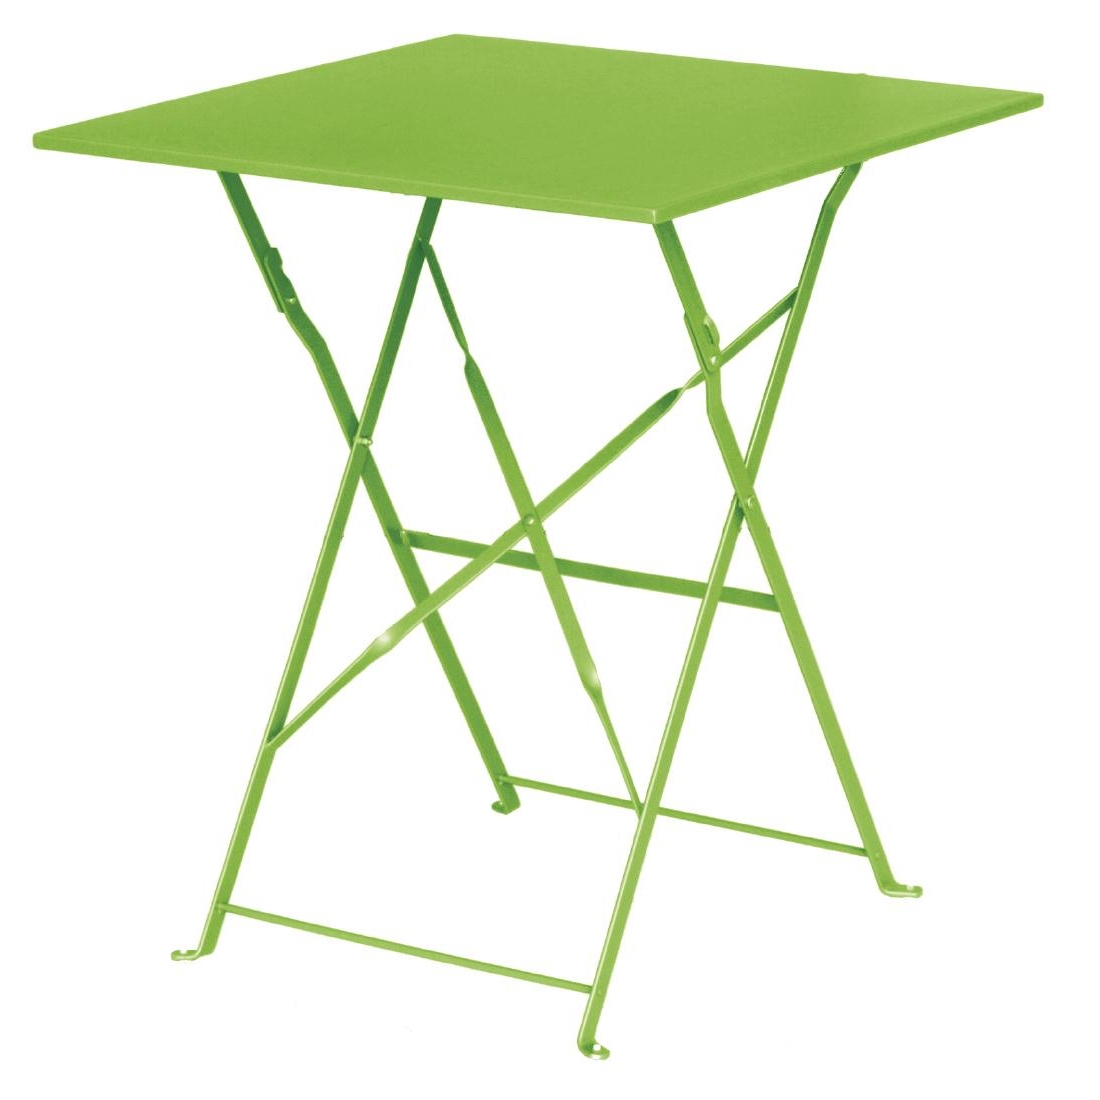 Pavement Table The Parisian Green Party and Event Hire